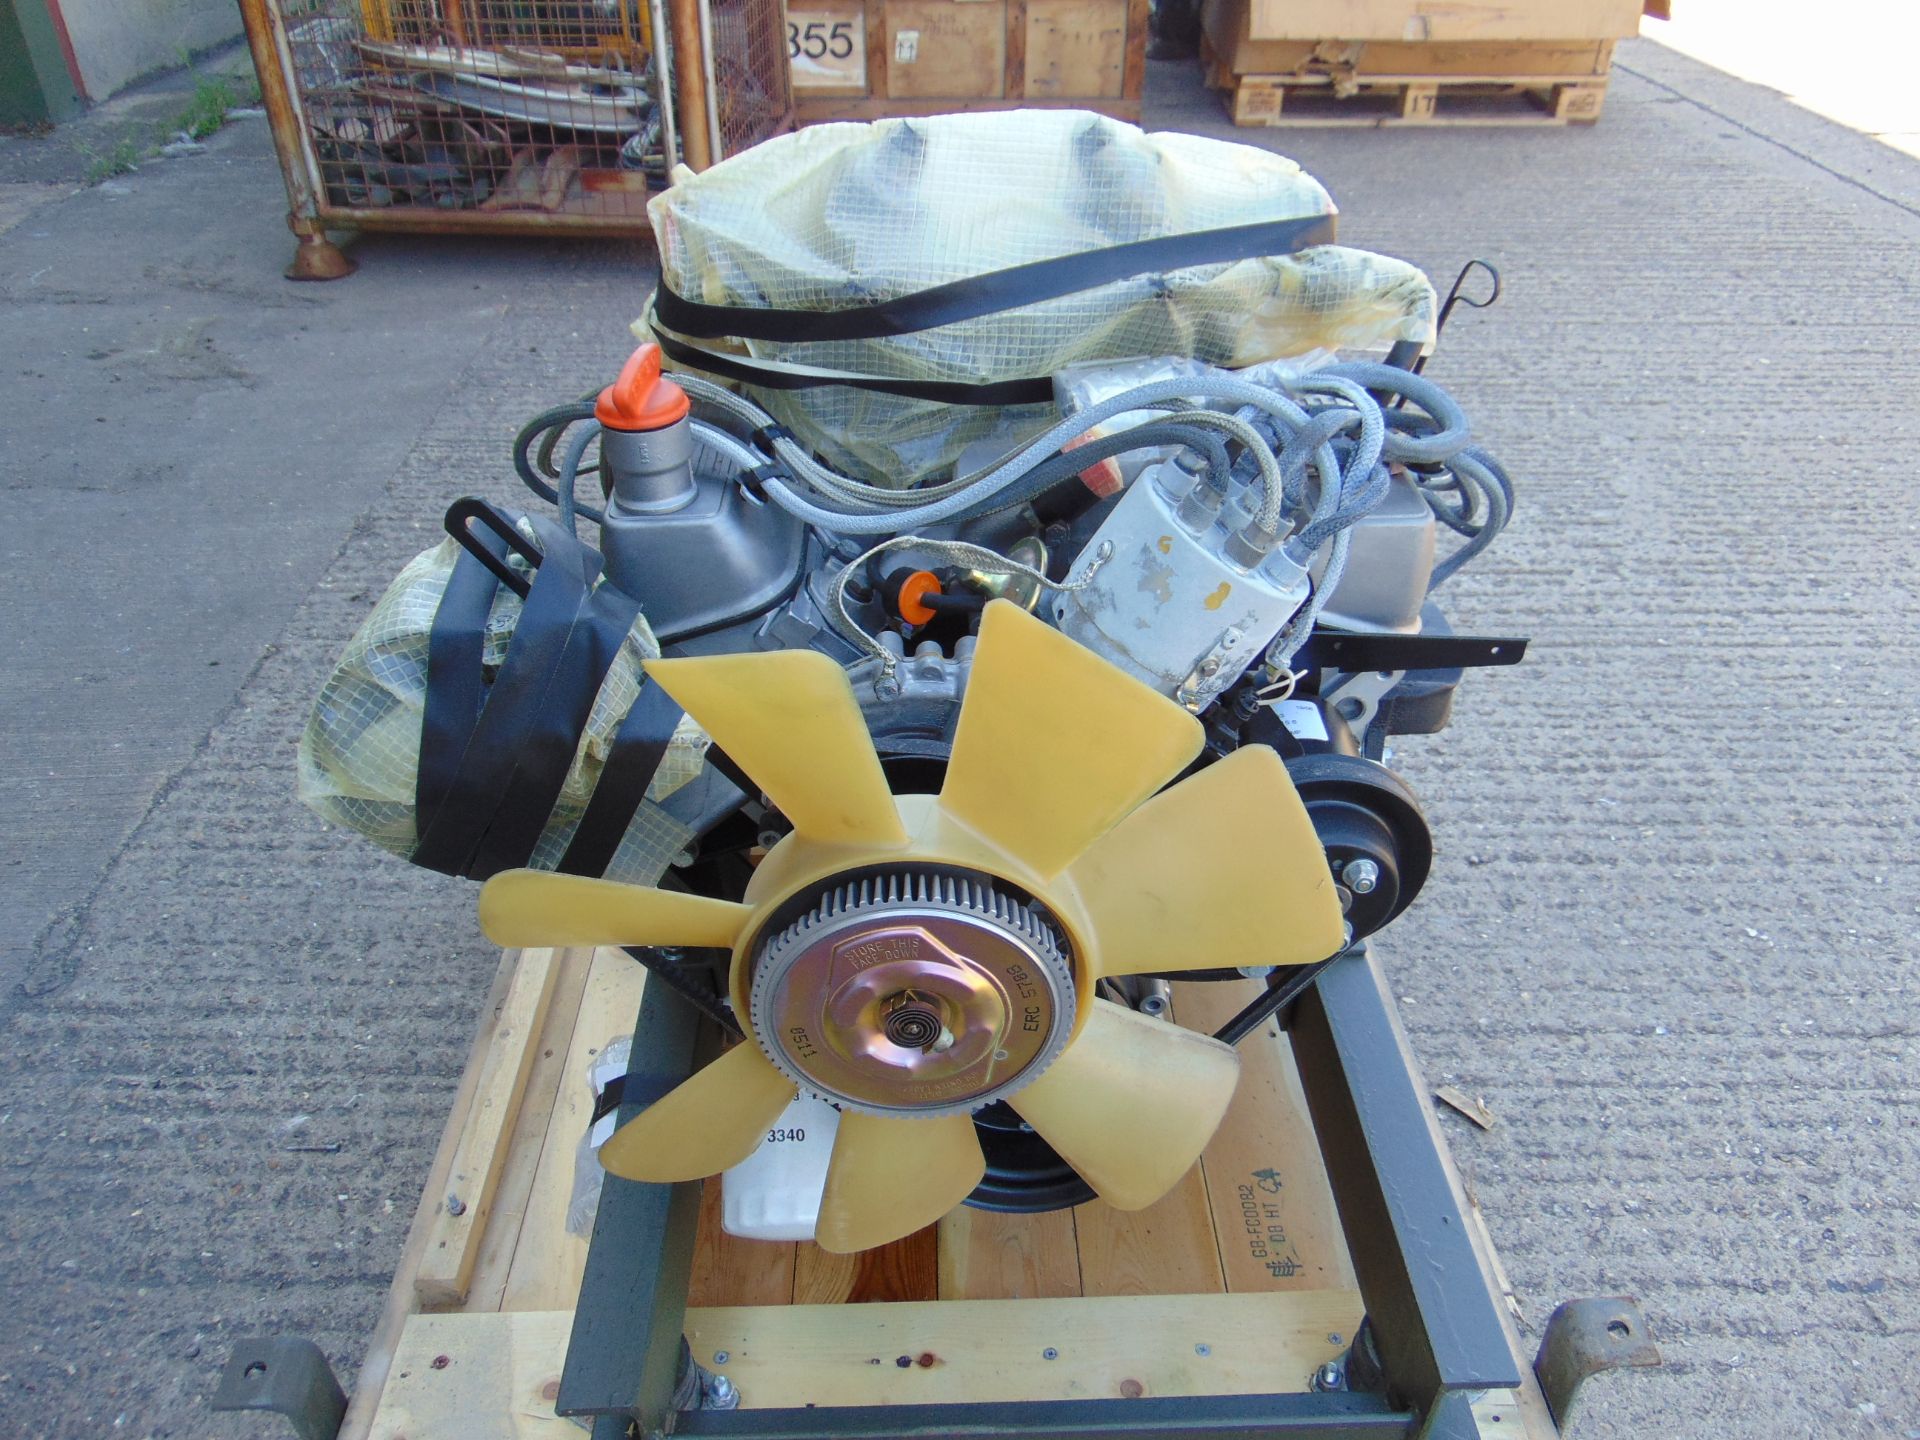 Fully Reconditioned Land Rover V8 Engine c/w all Accessories, as shown in Crate etc - Image 3 of 21